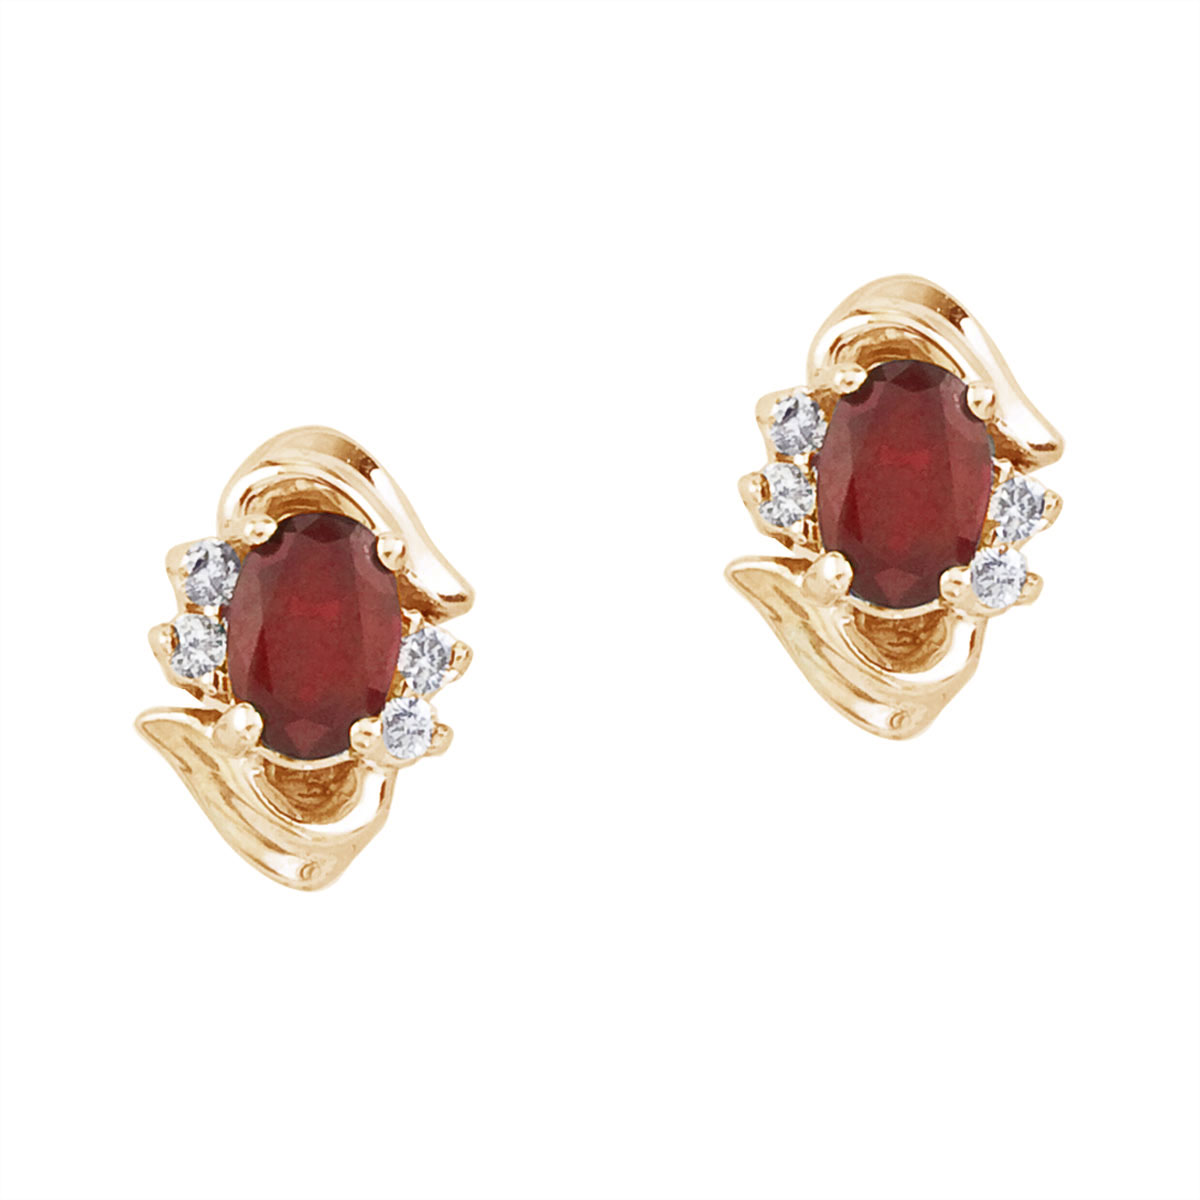 Stunning 14k yellow gold and ruby earrings. Featuring natural 6x4 mm oval rubies and .11 total ca...